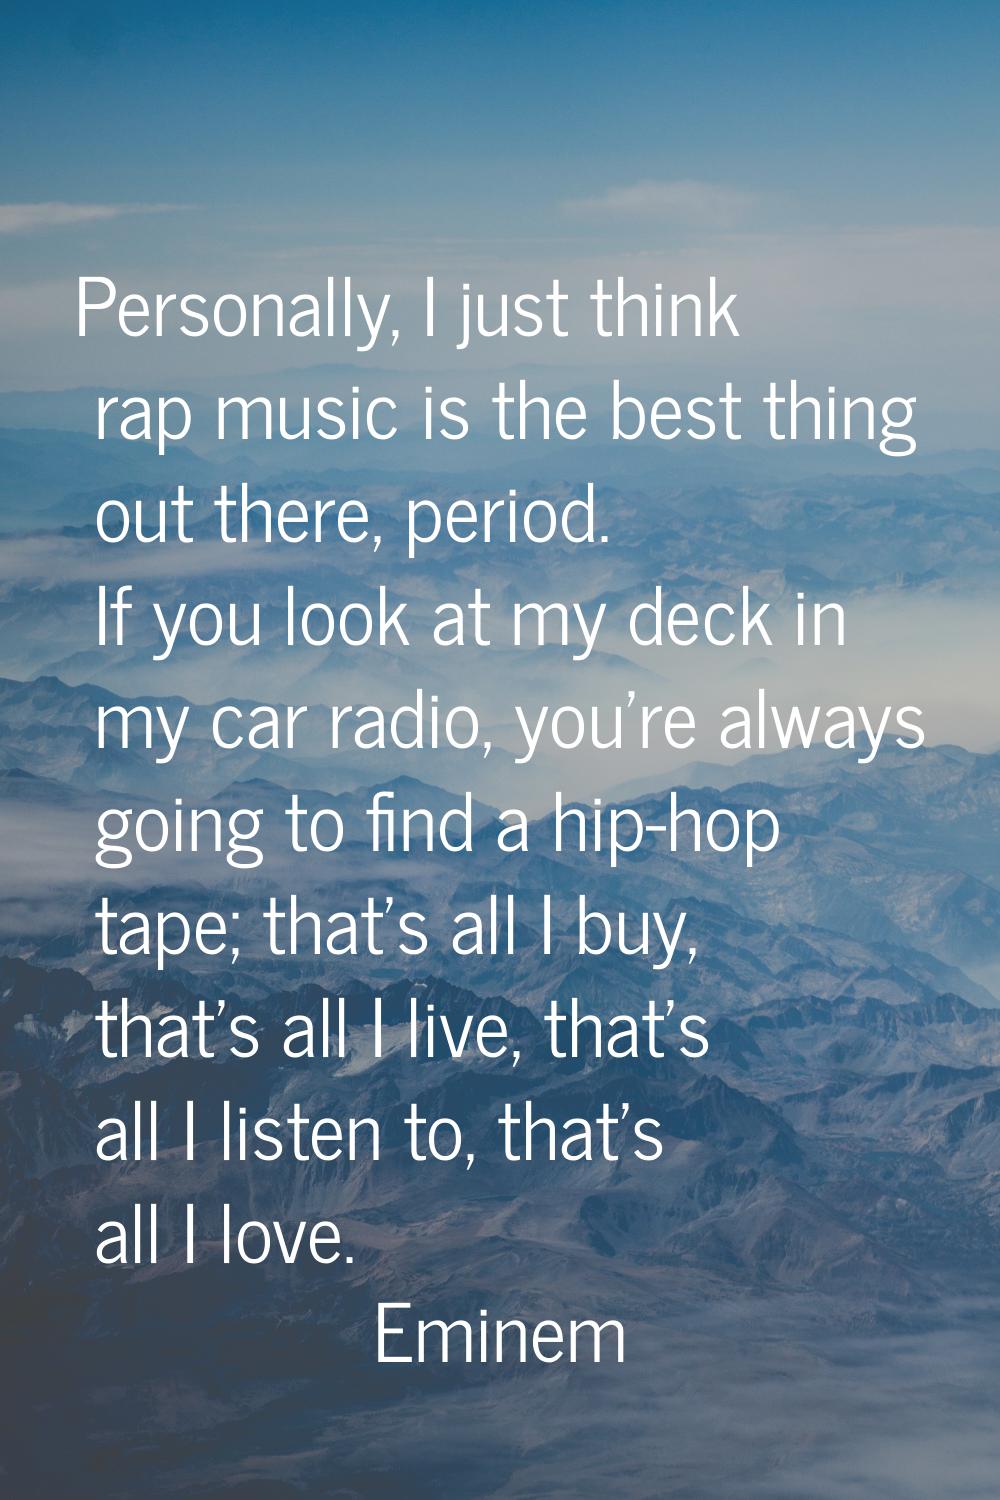 Personally, I just think rap music is the best thing out there, period. If you look at my deck in m